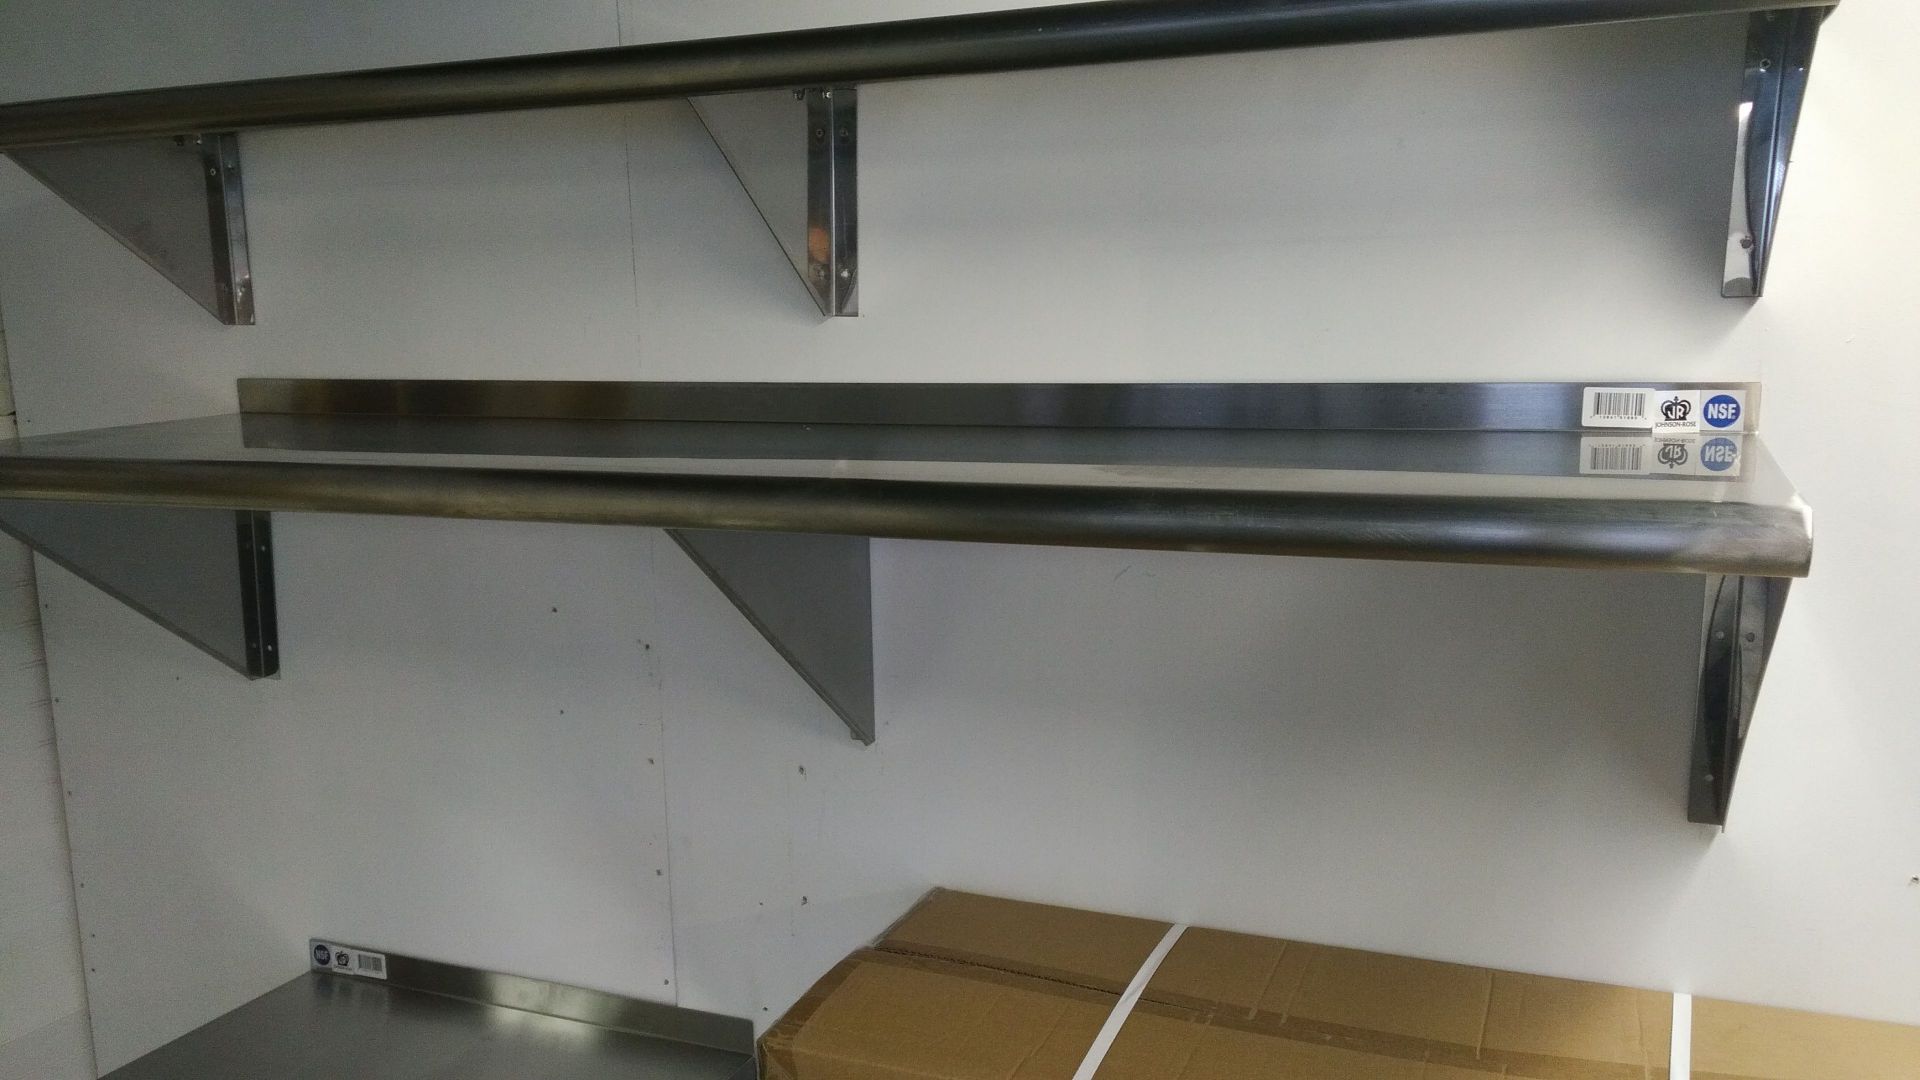 16" x 60" Stainless Wall Shelves - Lot of 2 - Image 4 of 7